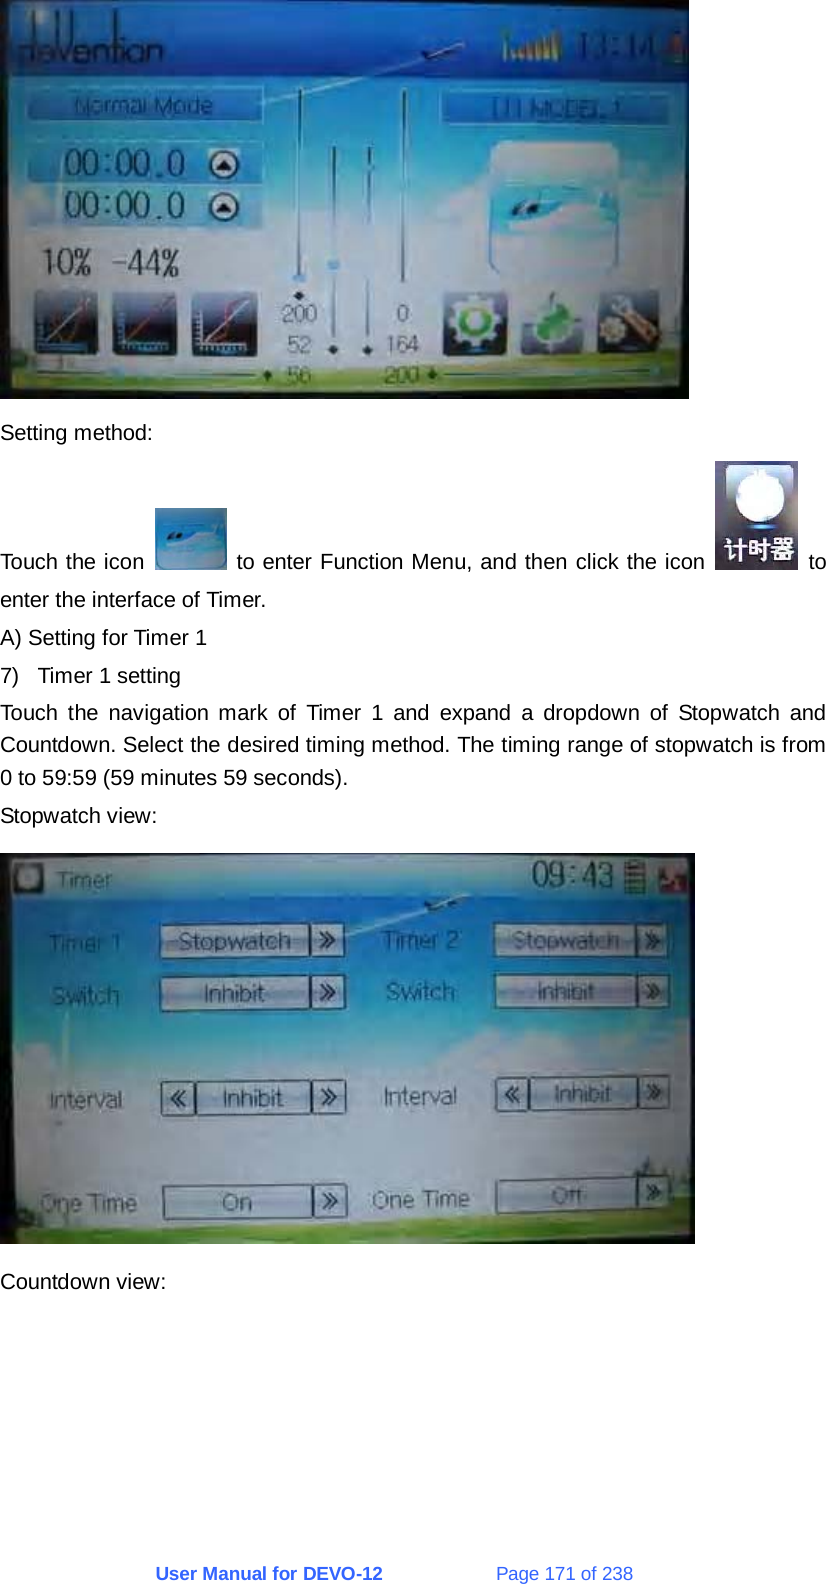 User Manual for DEVO-12             Page 171 of 238  Setting method: Touch the icon   to enter Function Menu, and then click the icon   to enter the interface of Timer. A) Setting for Timer 1 7)  Timer 1 setting Touch the navigation mark of Timer 1 and expand a dropdown of Stopwatch and Countdown. Select the desired timing method. The timing range of stopwatch is from 0 to 59:59 (59 minutes 59 seconds). Stopwatch view:  Countdown view: 